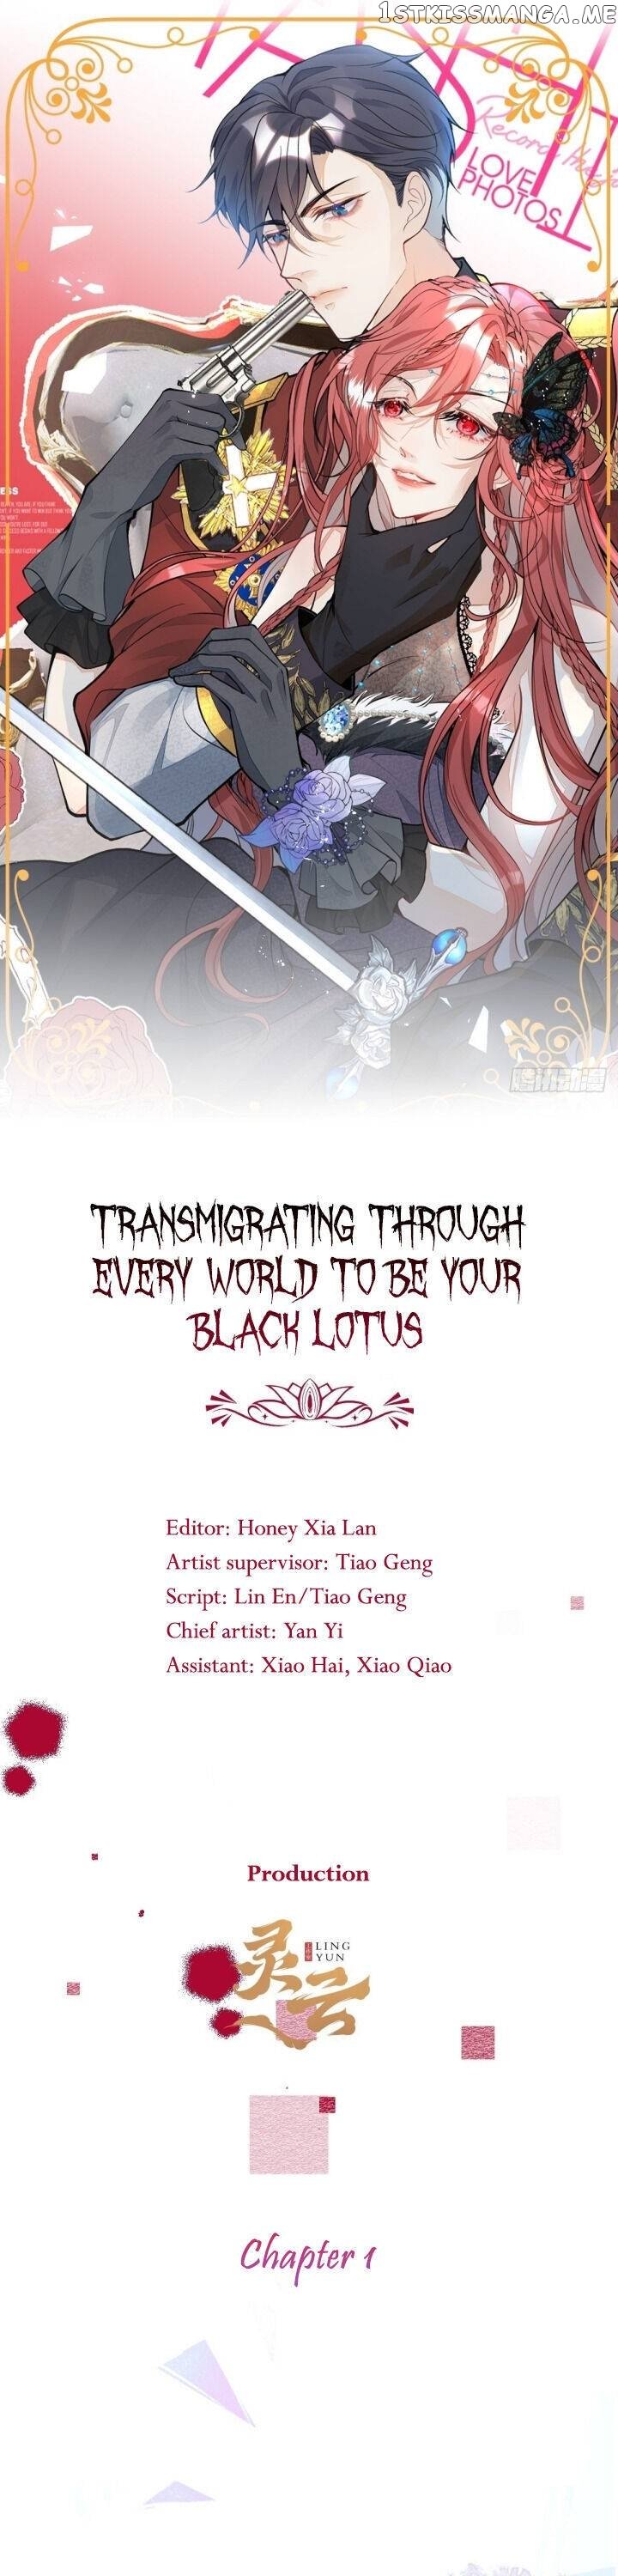 Transmigrating Through Every World To Be Your Black Lotus chapter 1